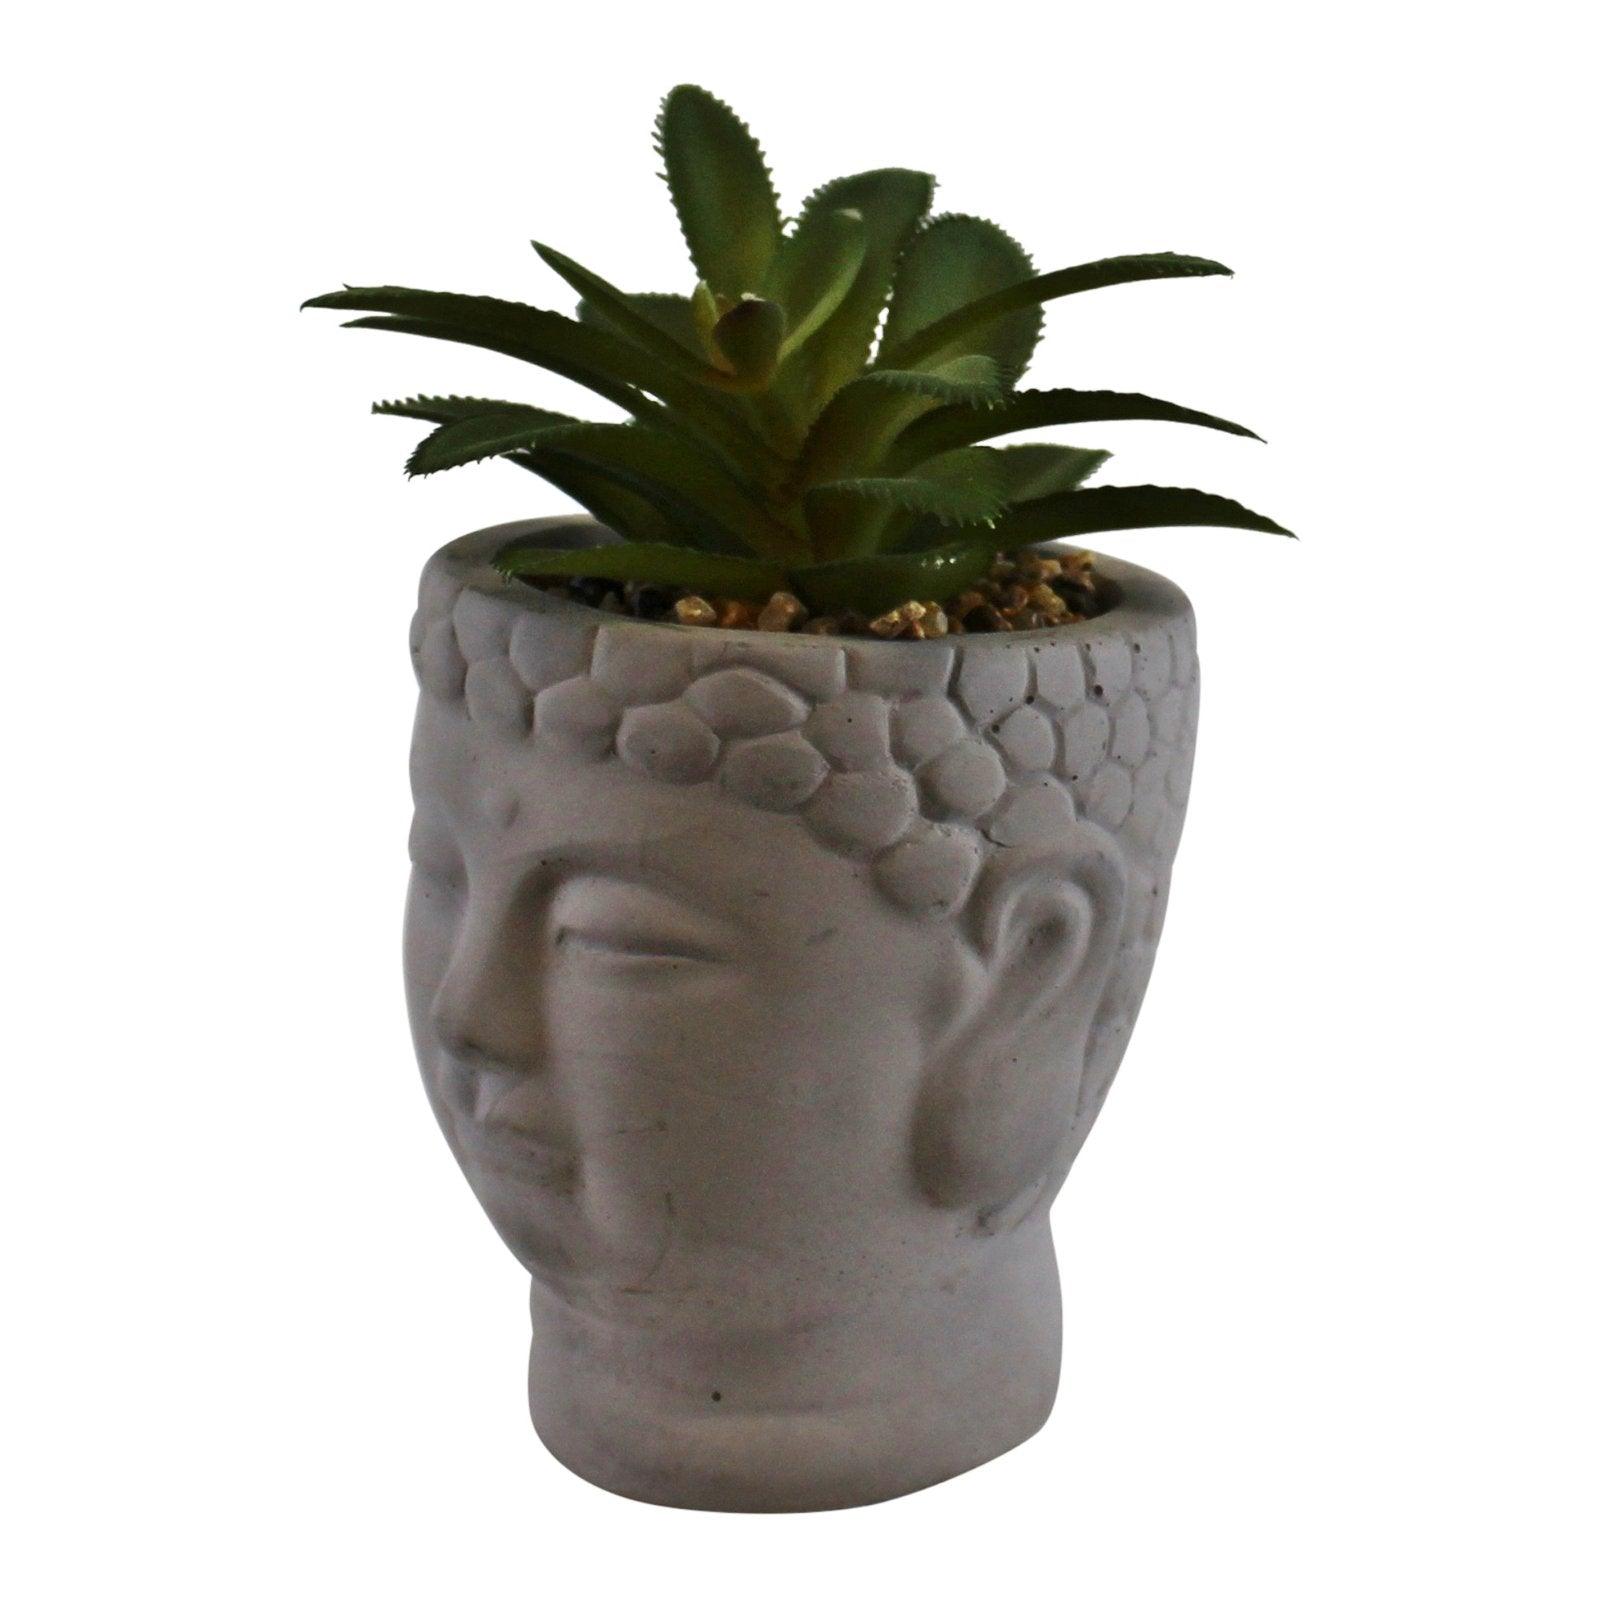 View Small Faux Succulent in Buddha Head Pot information